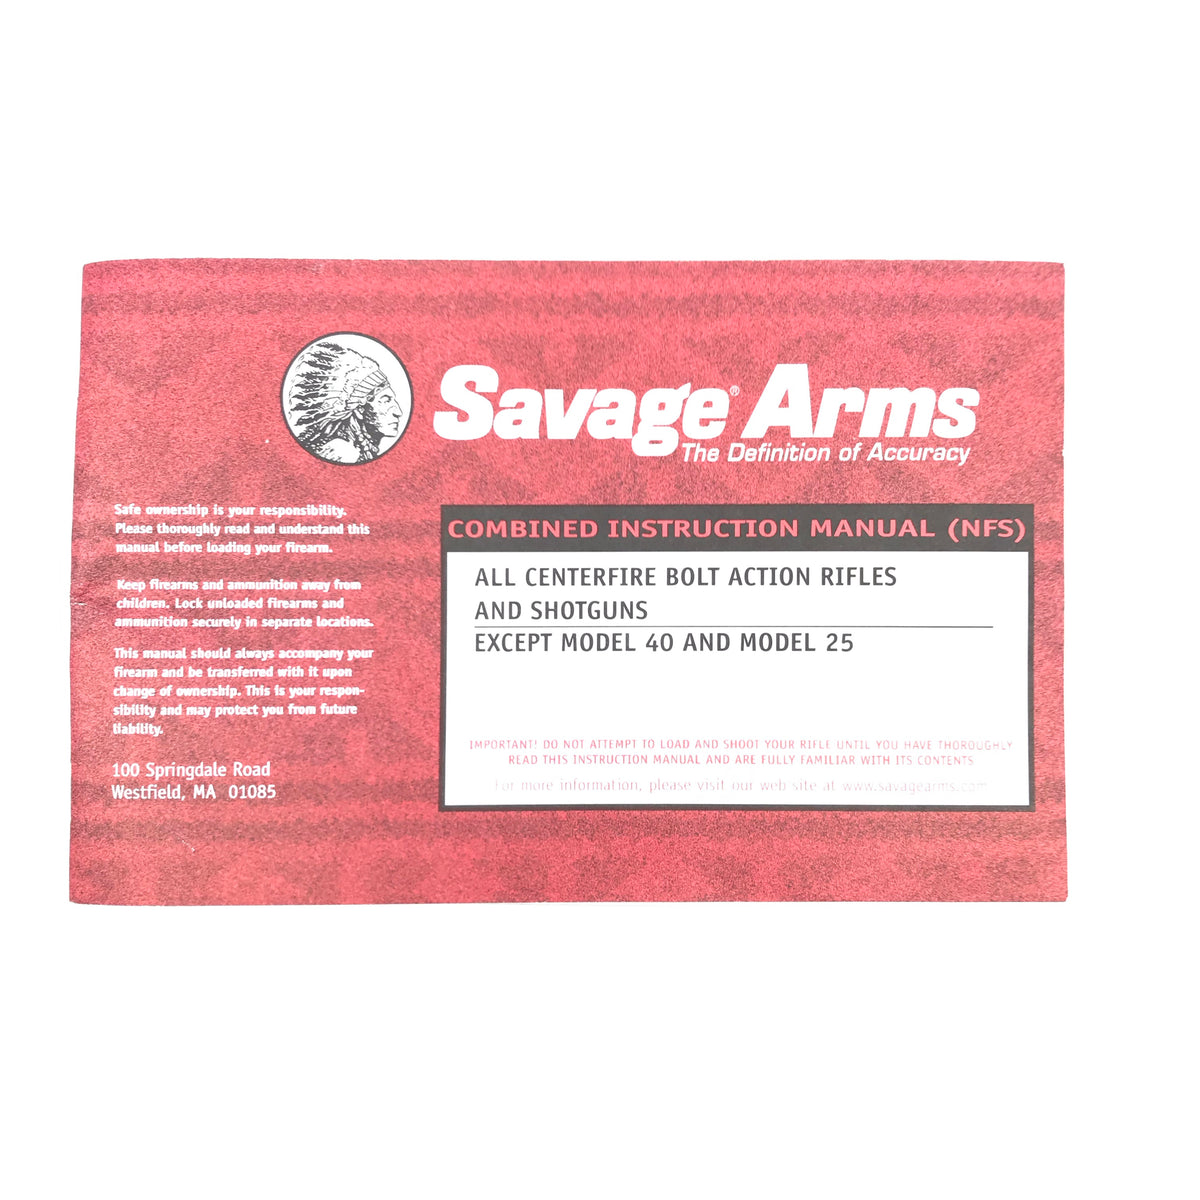 Savage Arms Combined Instruction Manual (NFS)